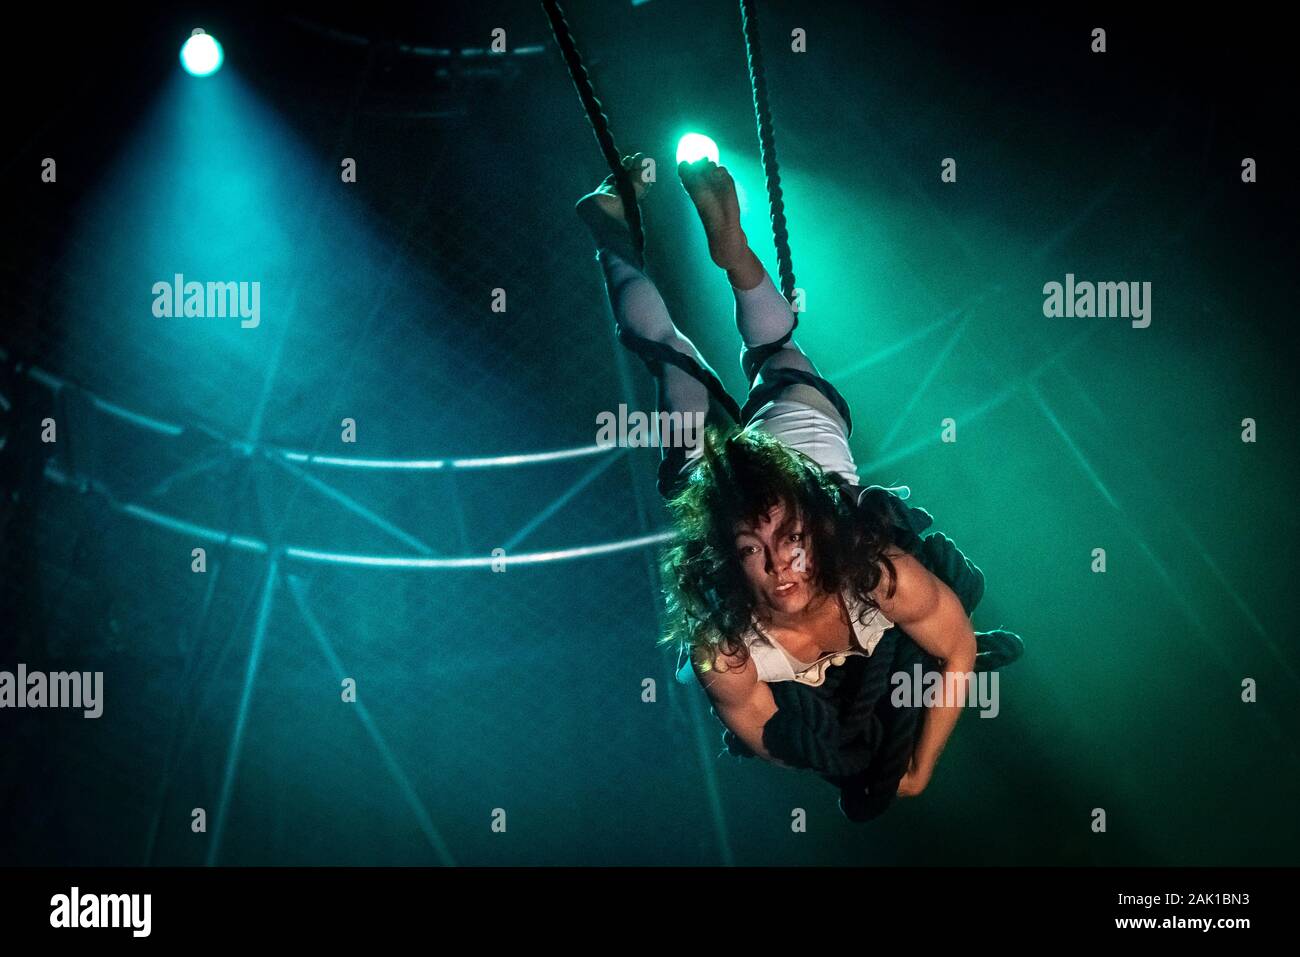 NoFit State Circus performs their new show “Lexicon” at the Roundhouse venue in north London, UK. Stock Photo